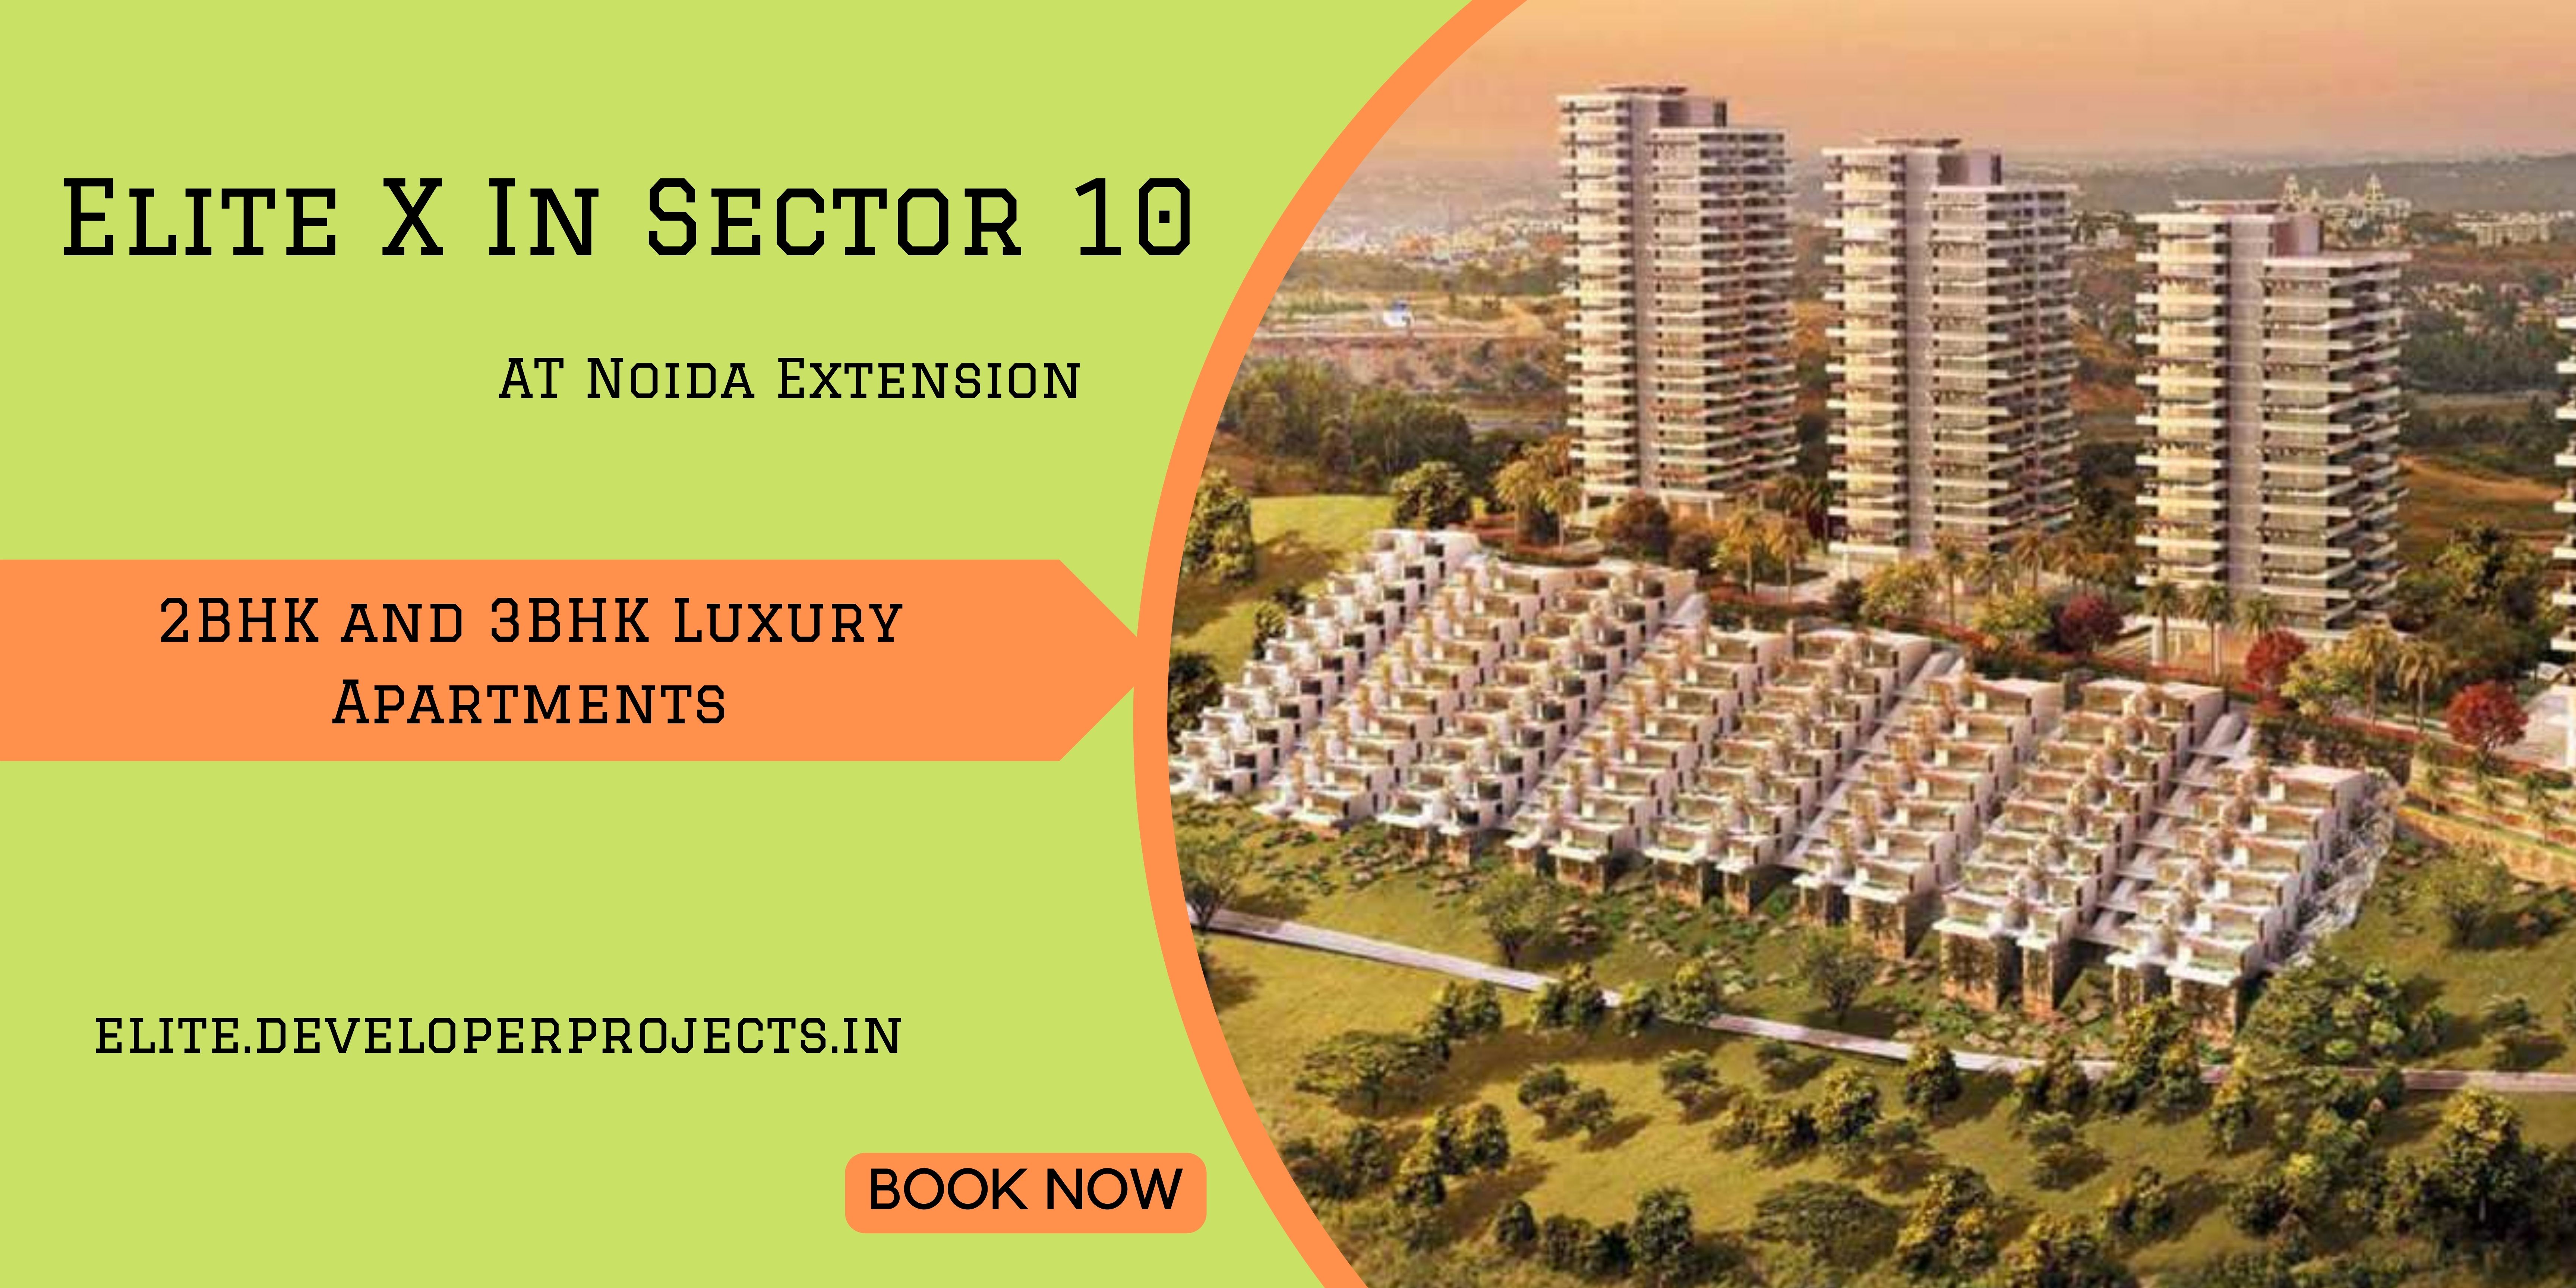 Elite X In Sector 10 Noida Extension - The Fun Of Luxury Starts With Us